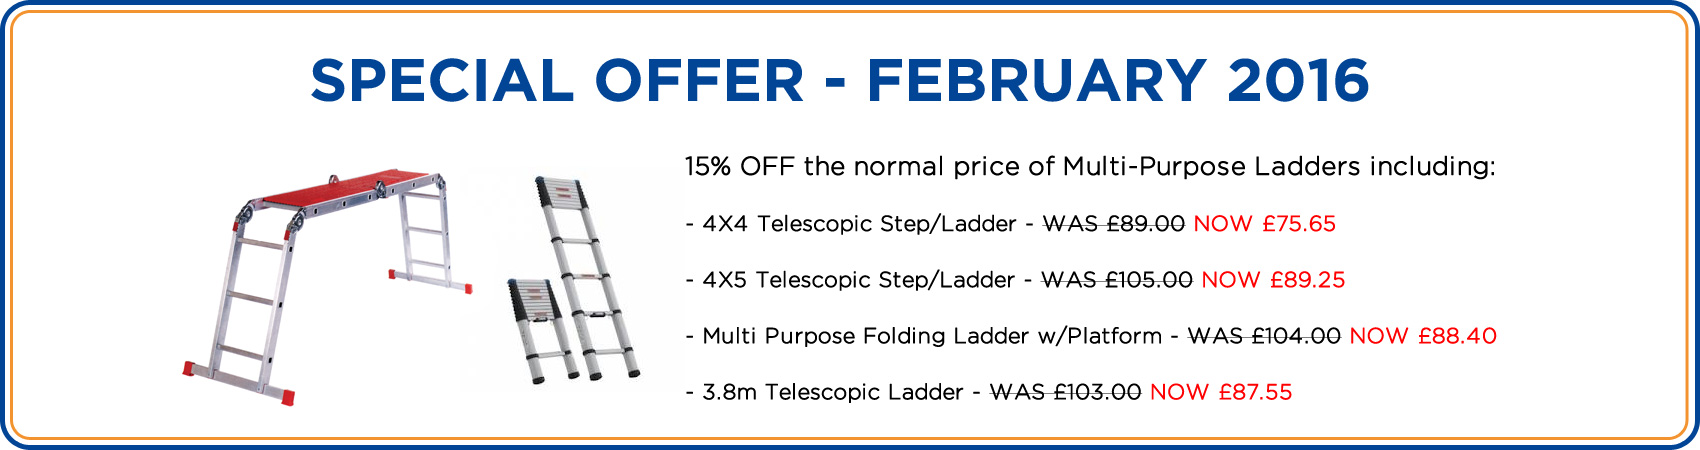 Buy Multi-Purpose Ladders for Less this February